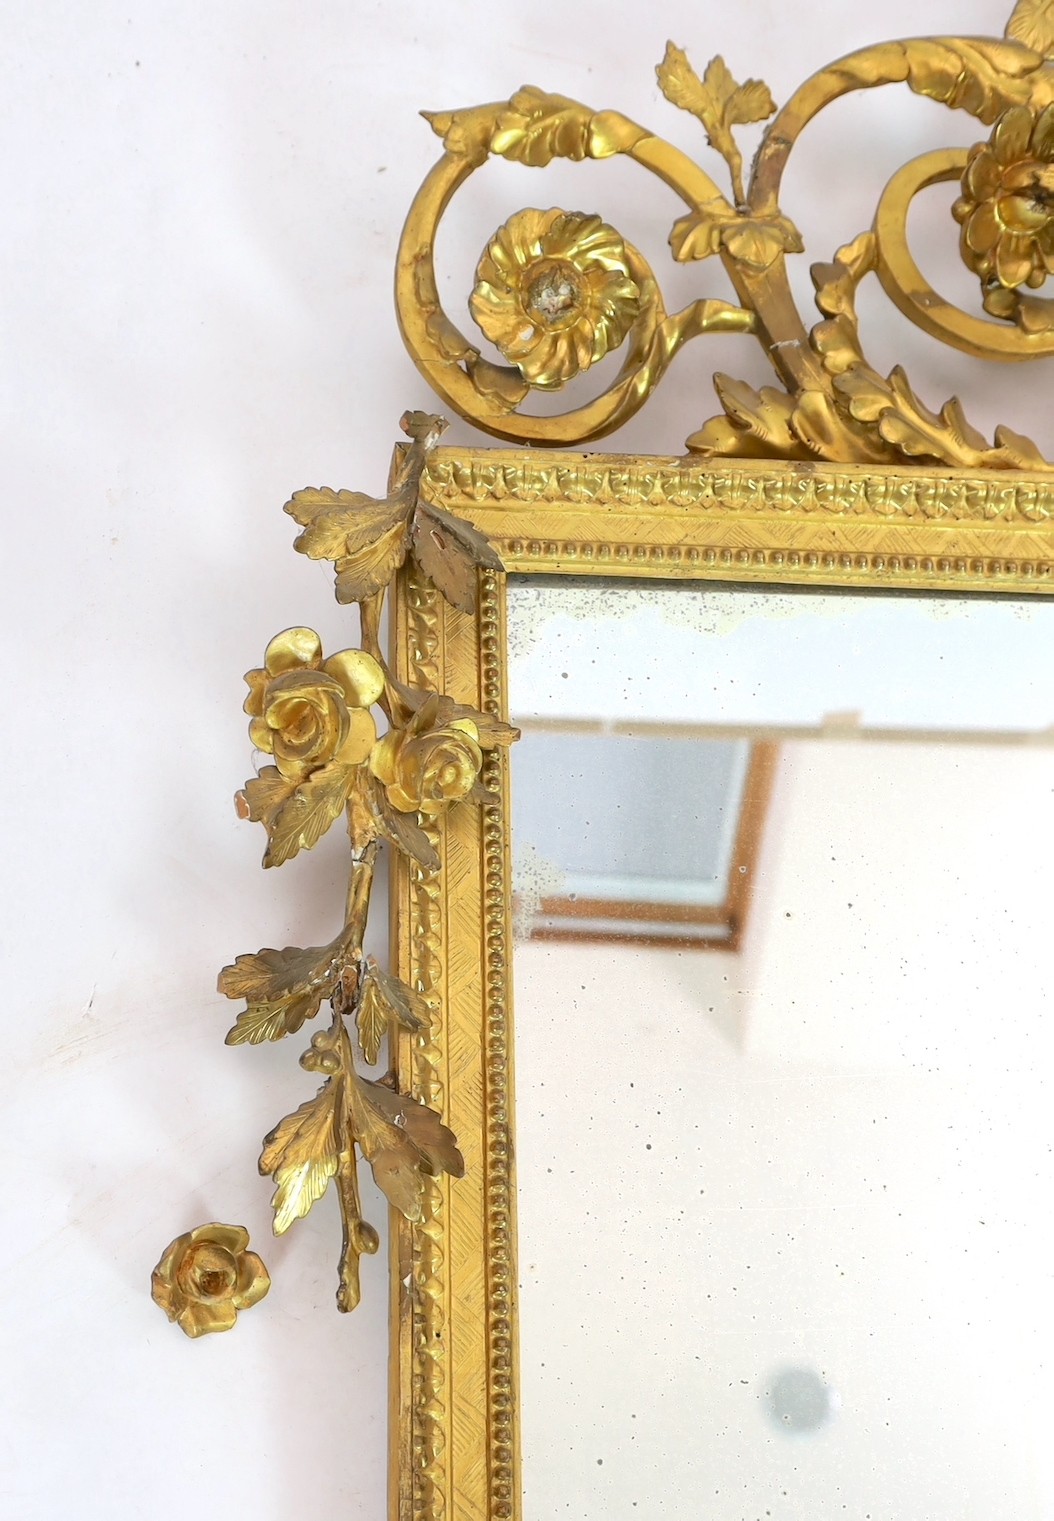 A 19th century century carved giltwood wall mirror, with elaborate ornate eagle and flowering swag - Image 2 of 4